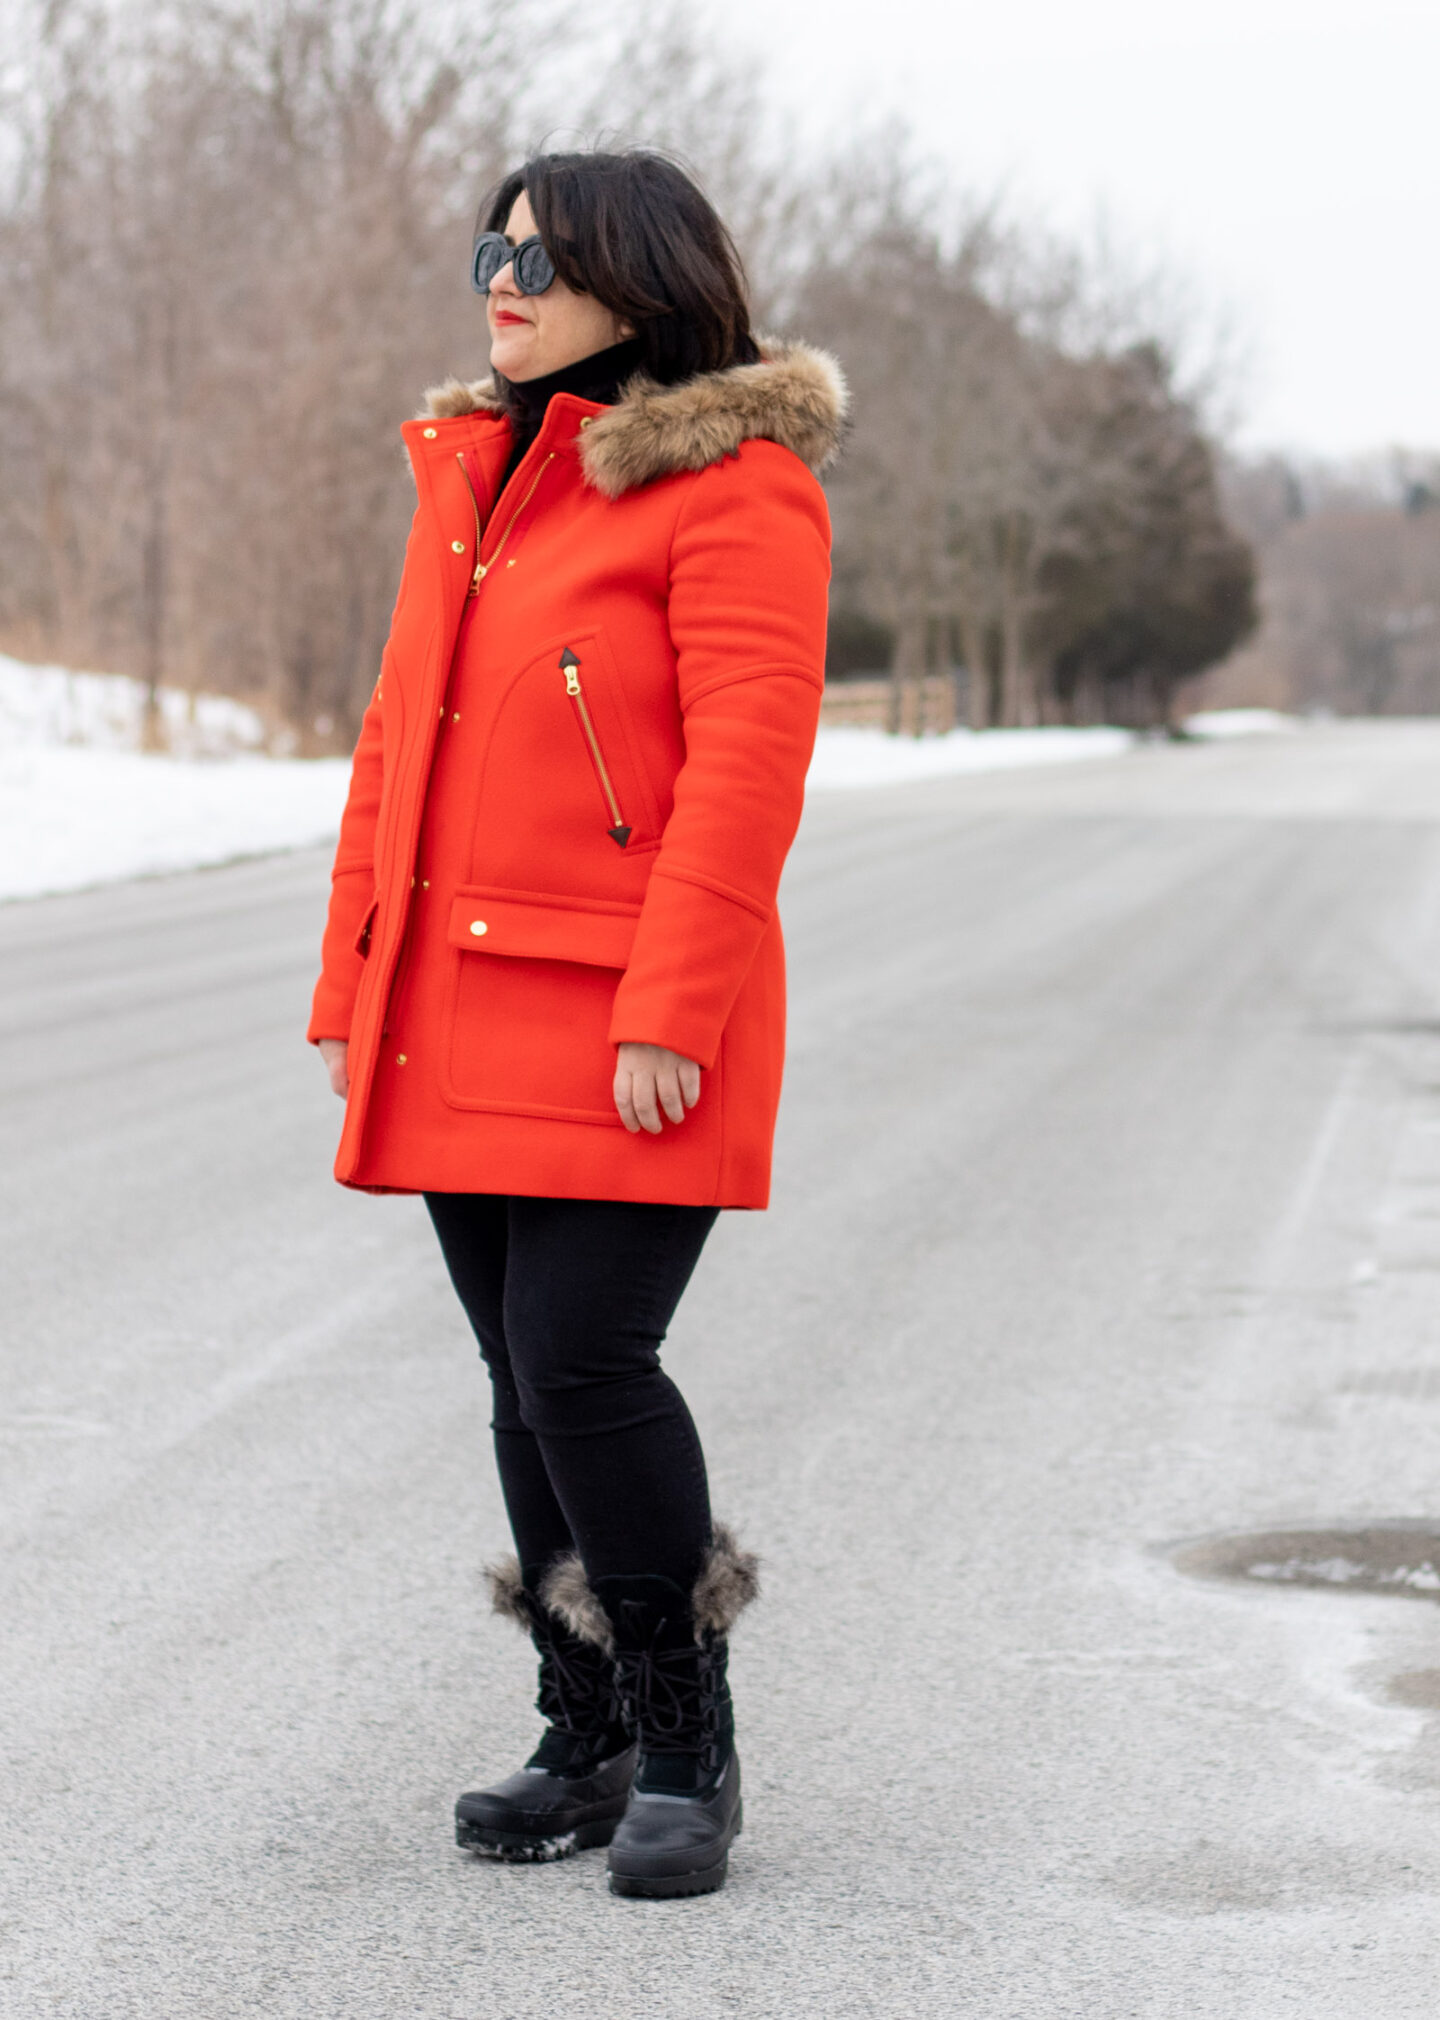 red jcrew coat, black outfit